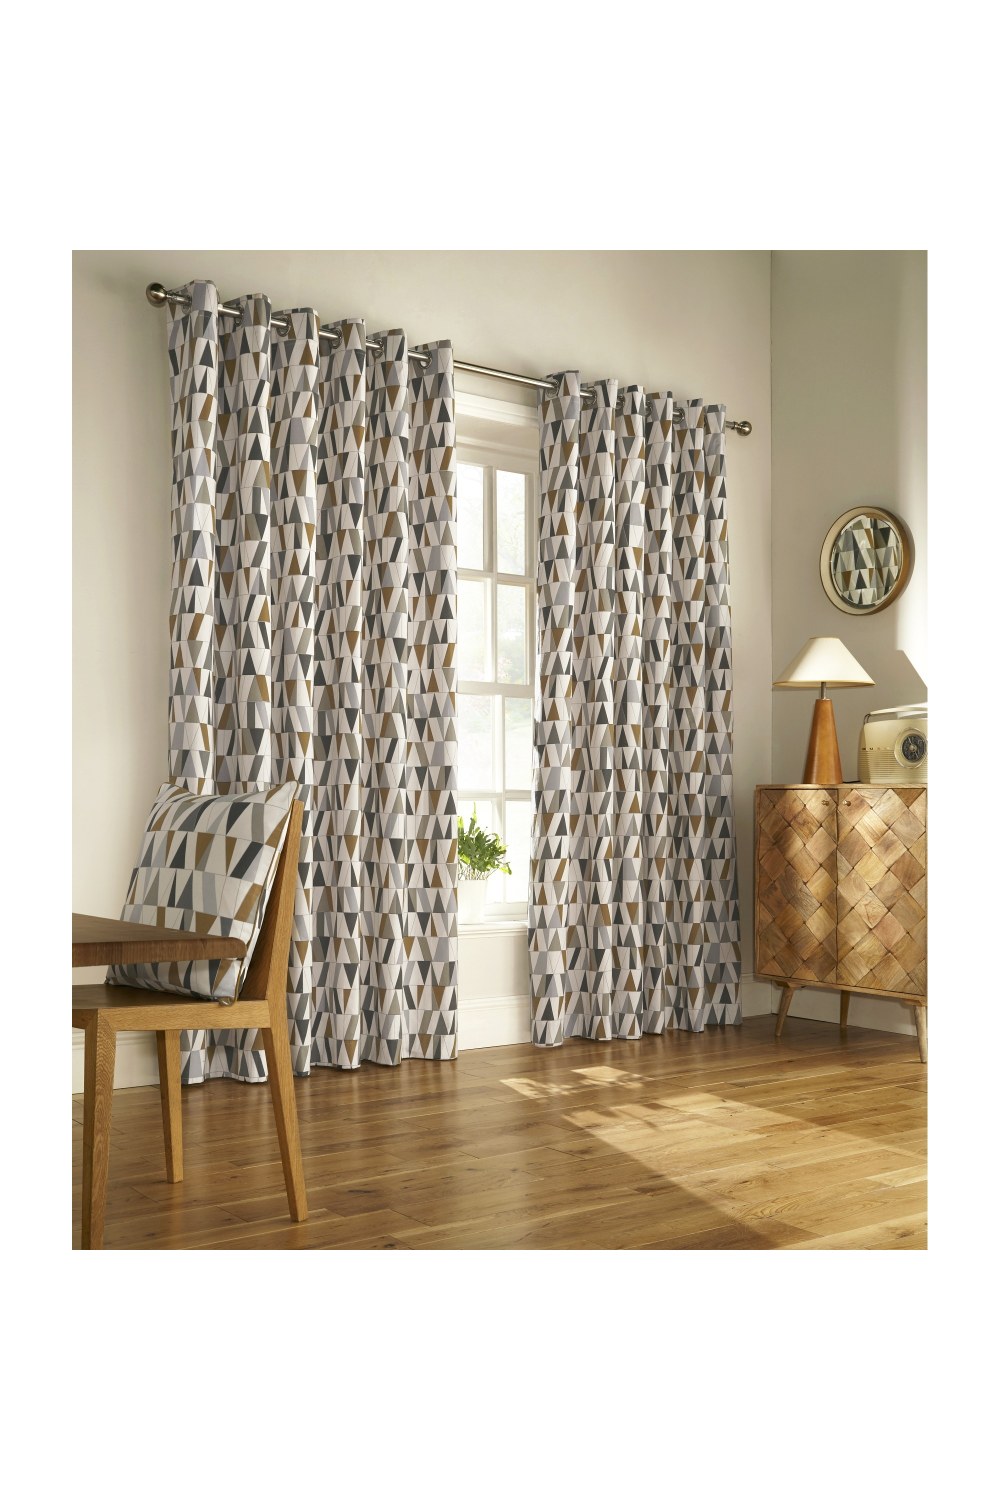 Furn Reno Ringtop Geometric Eyelet Curtains (Charcoal/Gold) (66in x 90in)